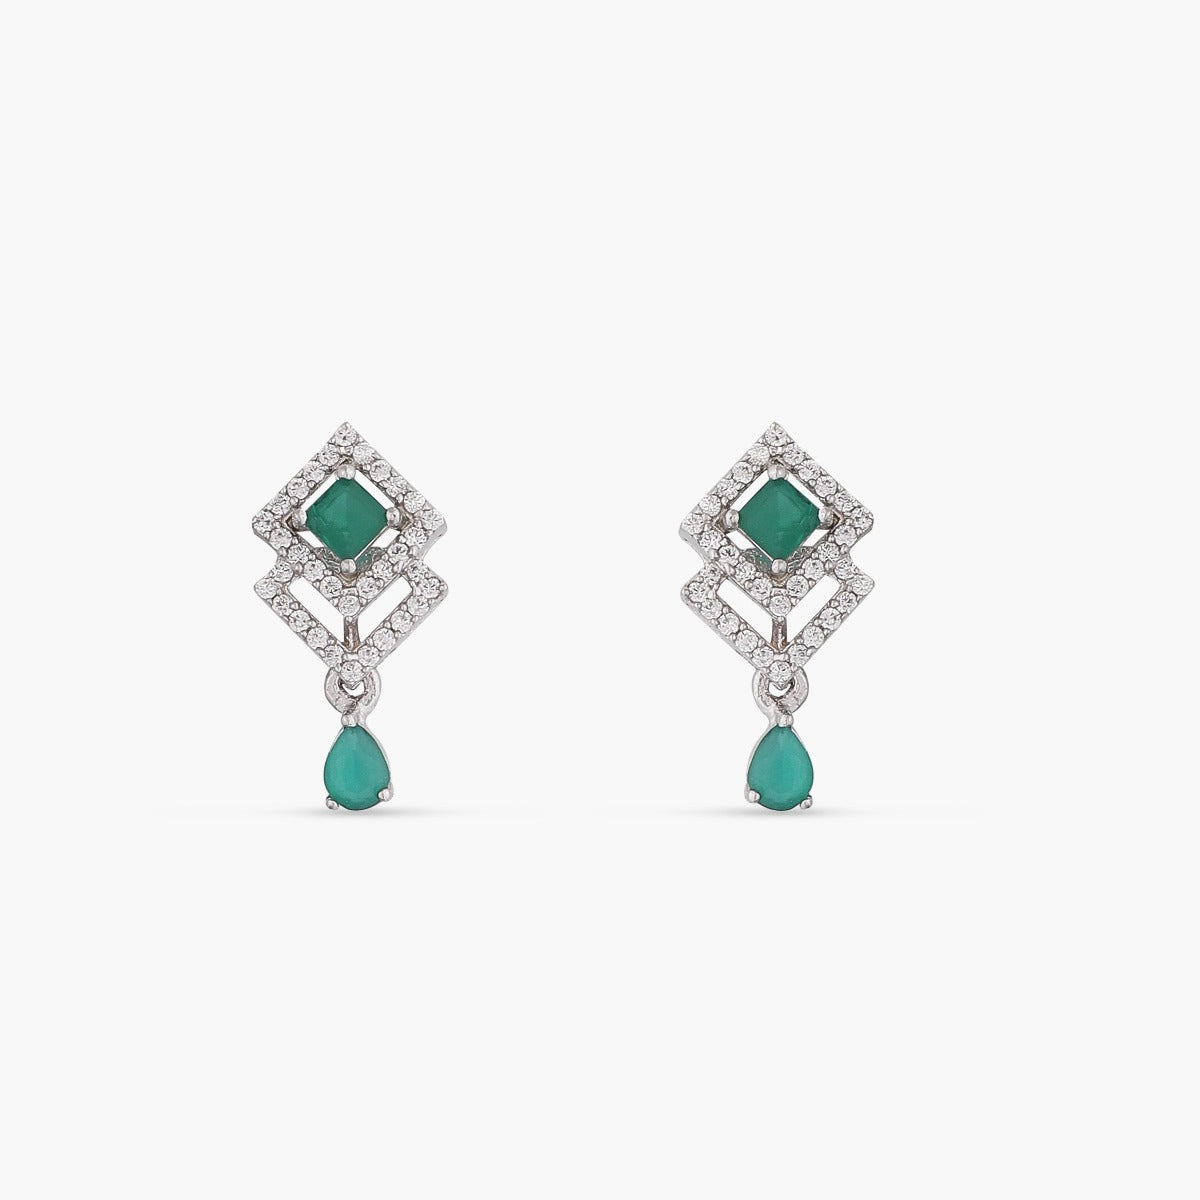 Double Square Delicate CZ Earring Studs